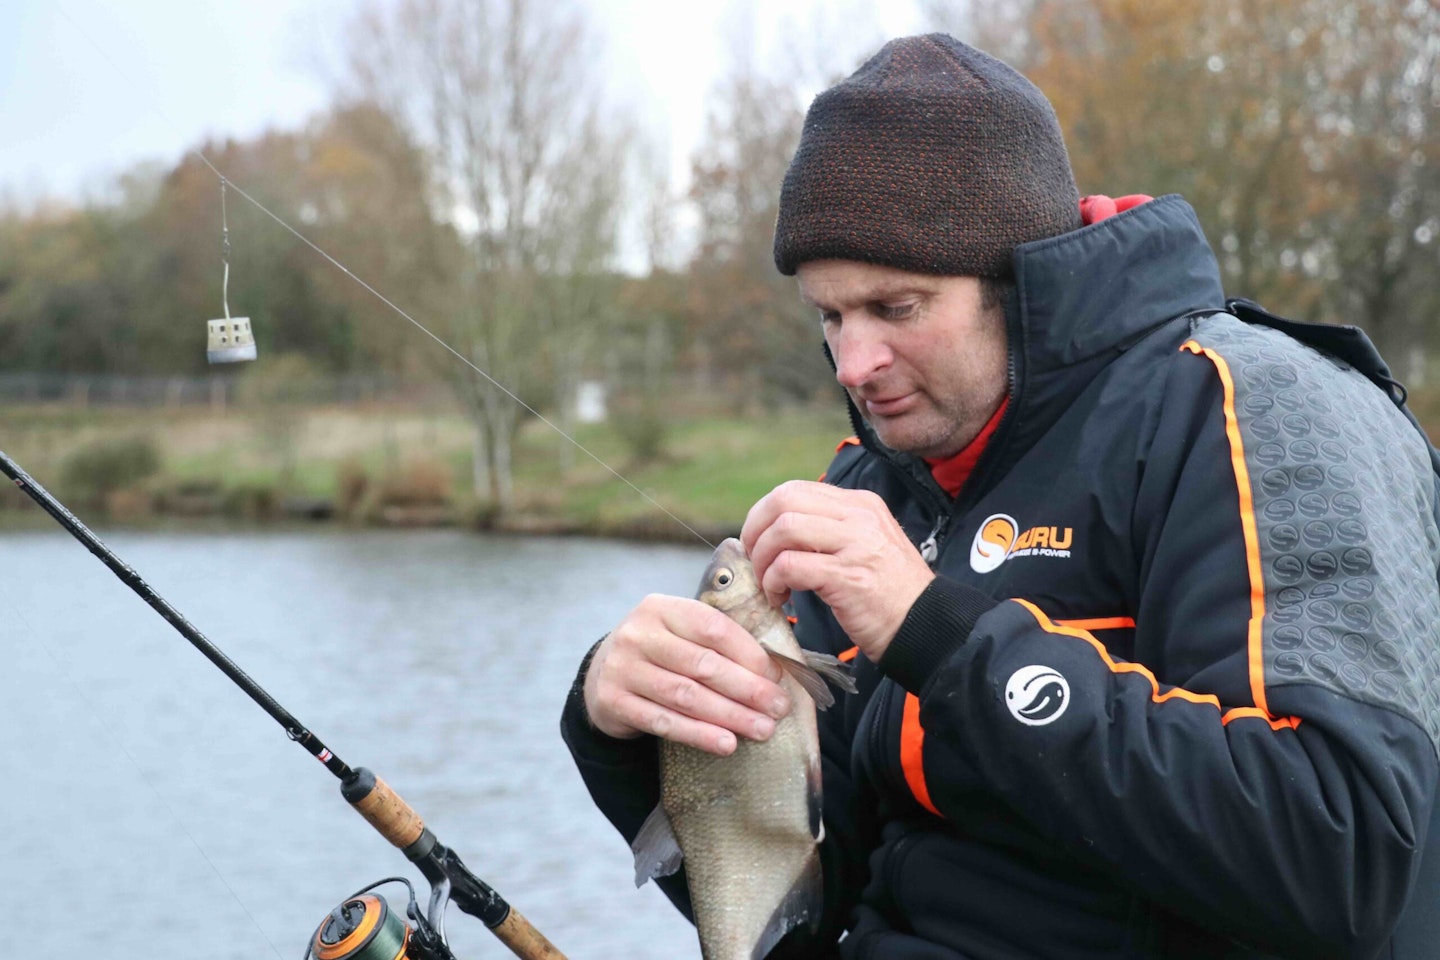 Get your tactics right and you'll be on for a netful of bream.